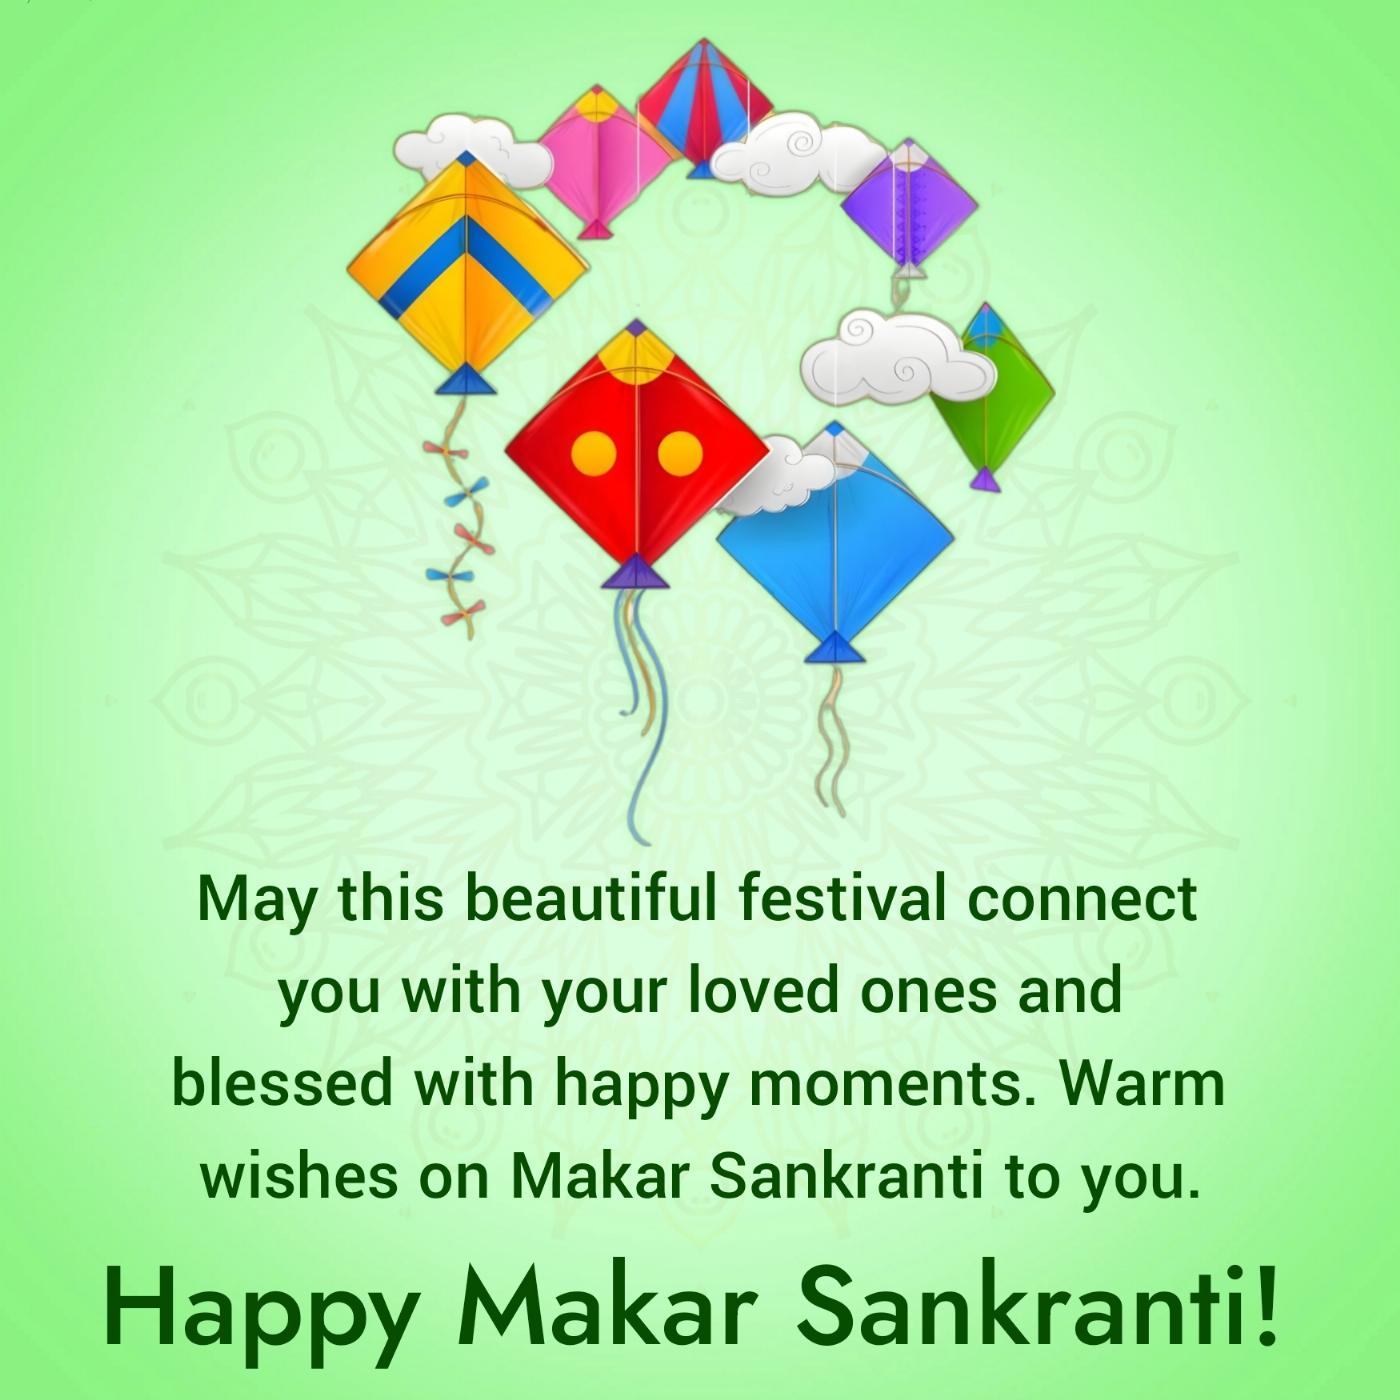 May this beautiful festival connect you with your loved ones